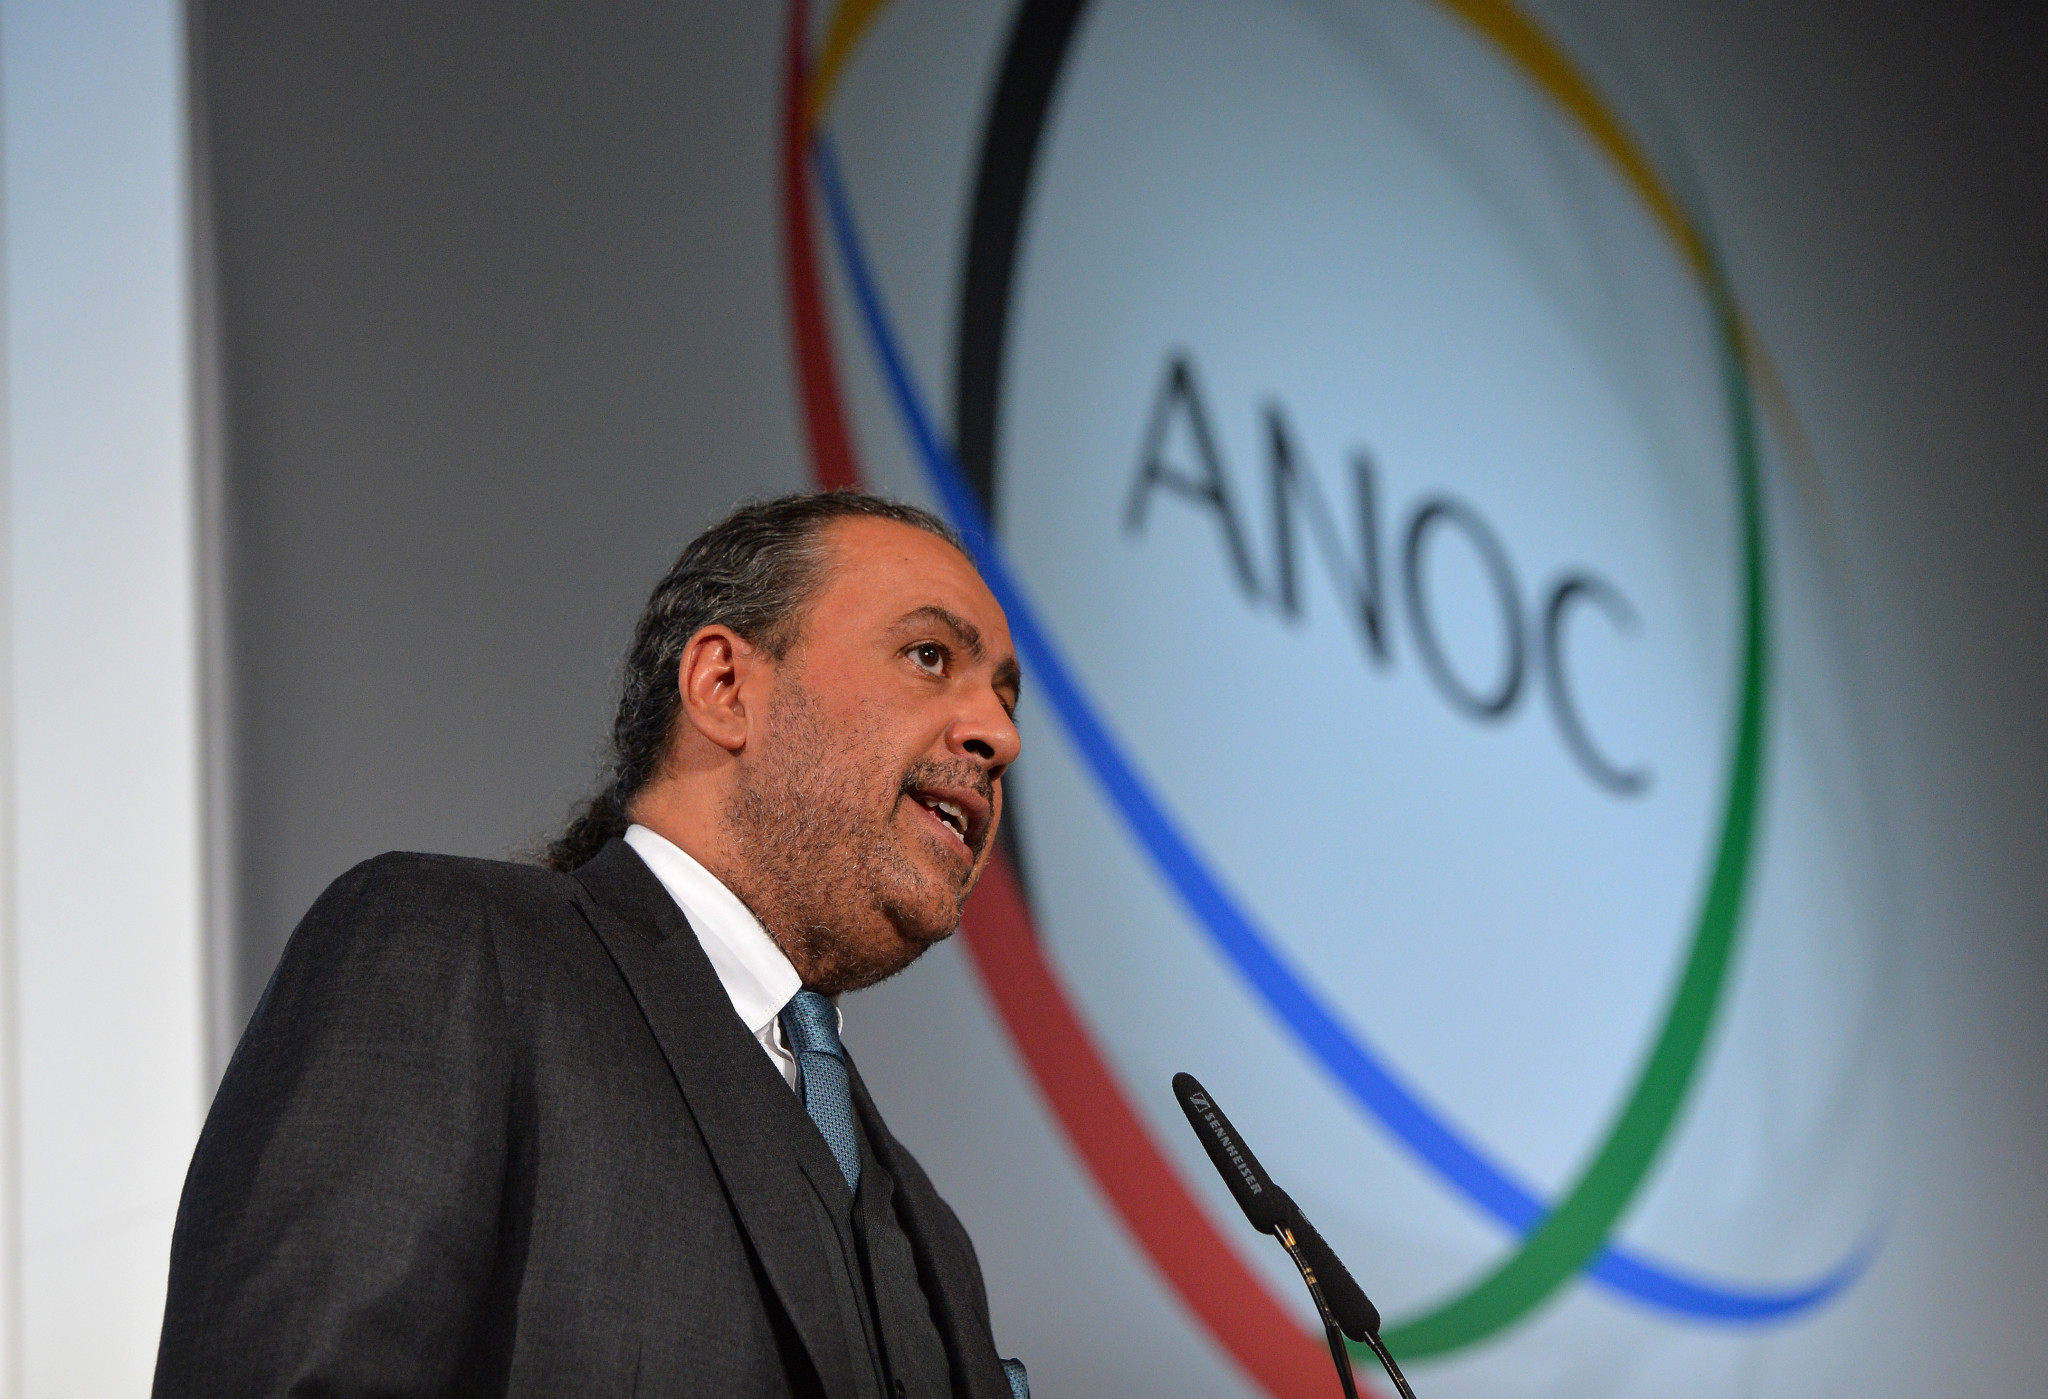 Sheikh Ahmad Al-Fahad Al-Sabah is set to be re-elected as ANOC President at its General Assembly in Tokyo later this month as he is the only candidate standing ©Getty Images